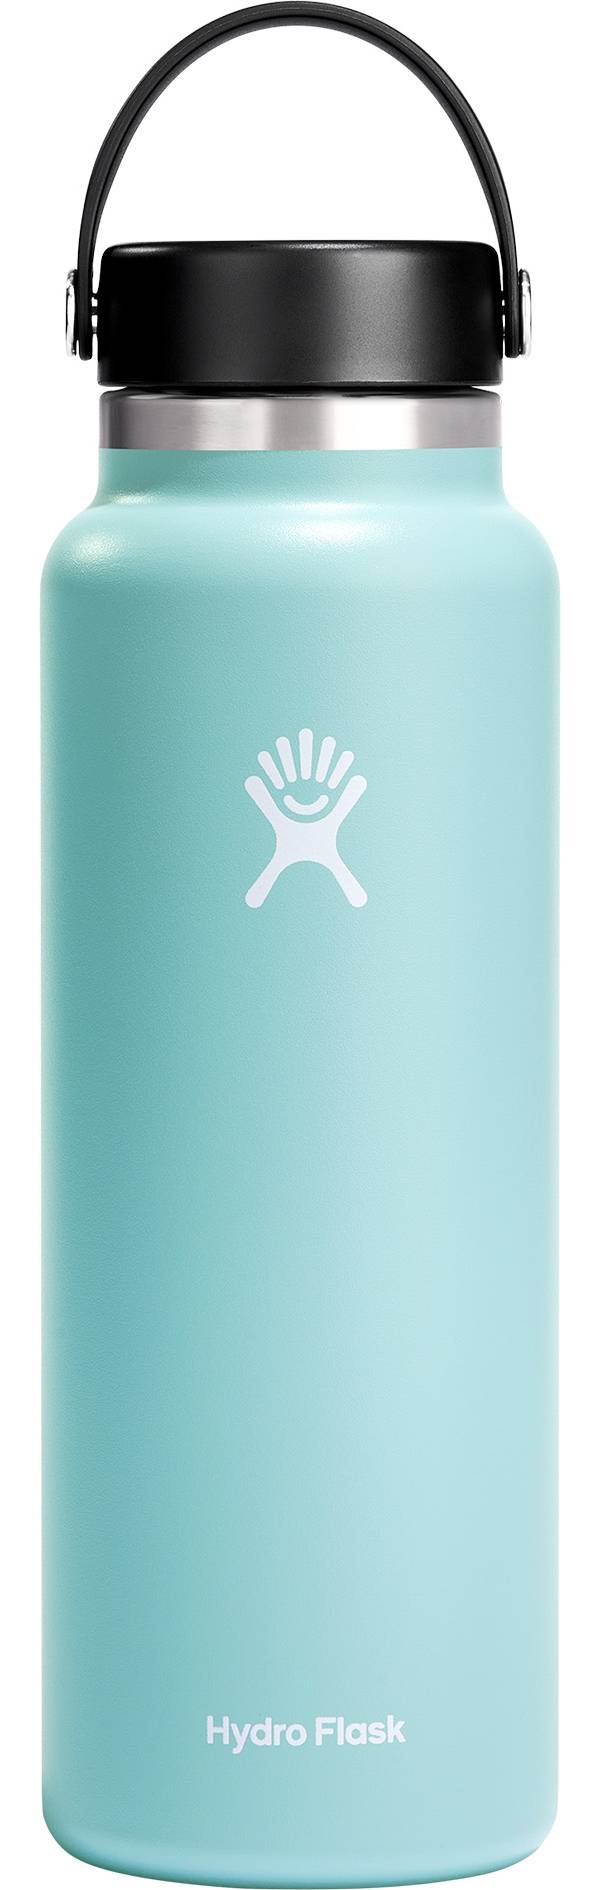 Hydro Flask 40 oz. Wide Mouth Bottle product image